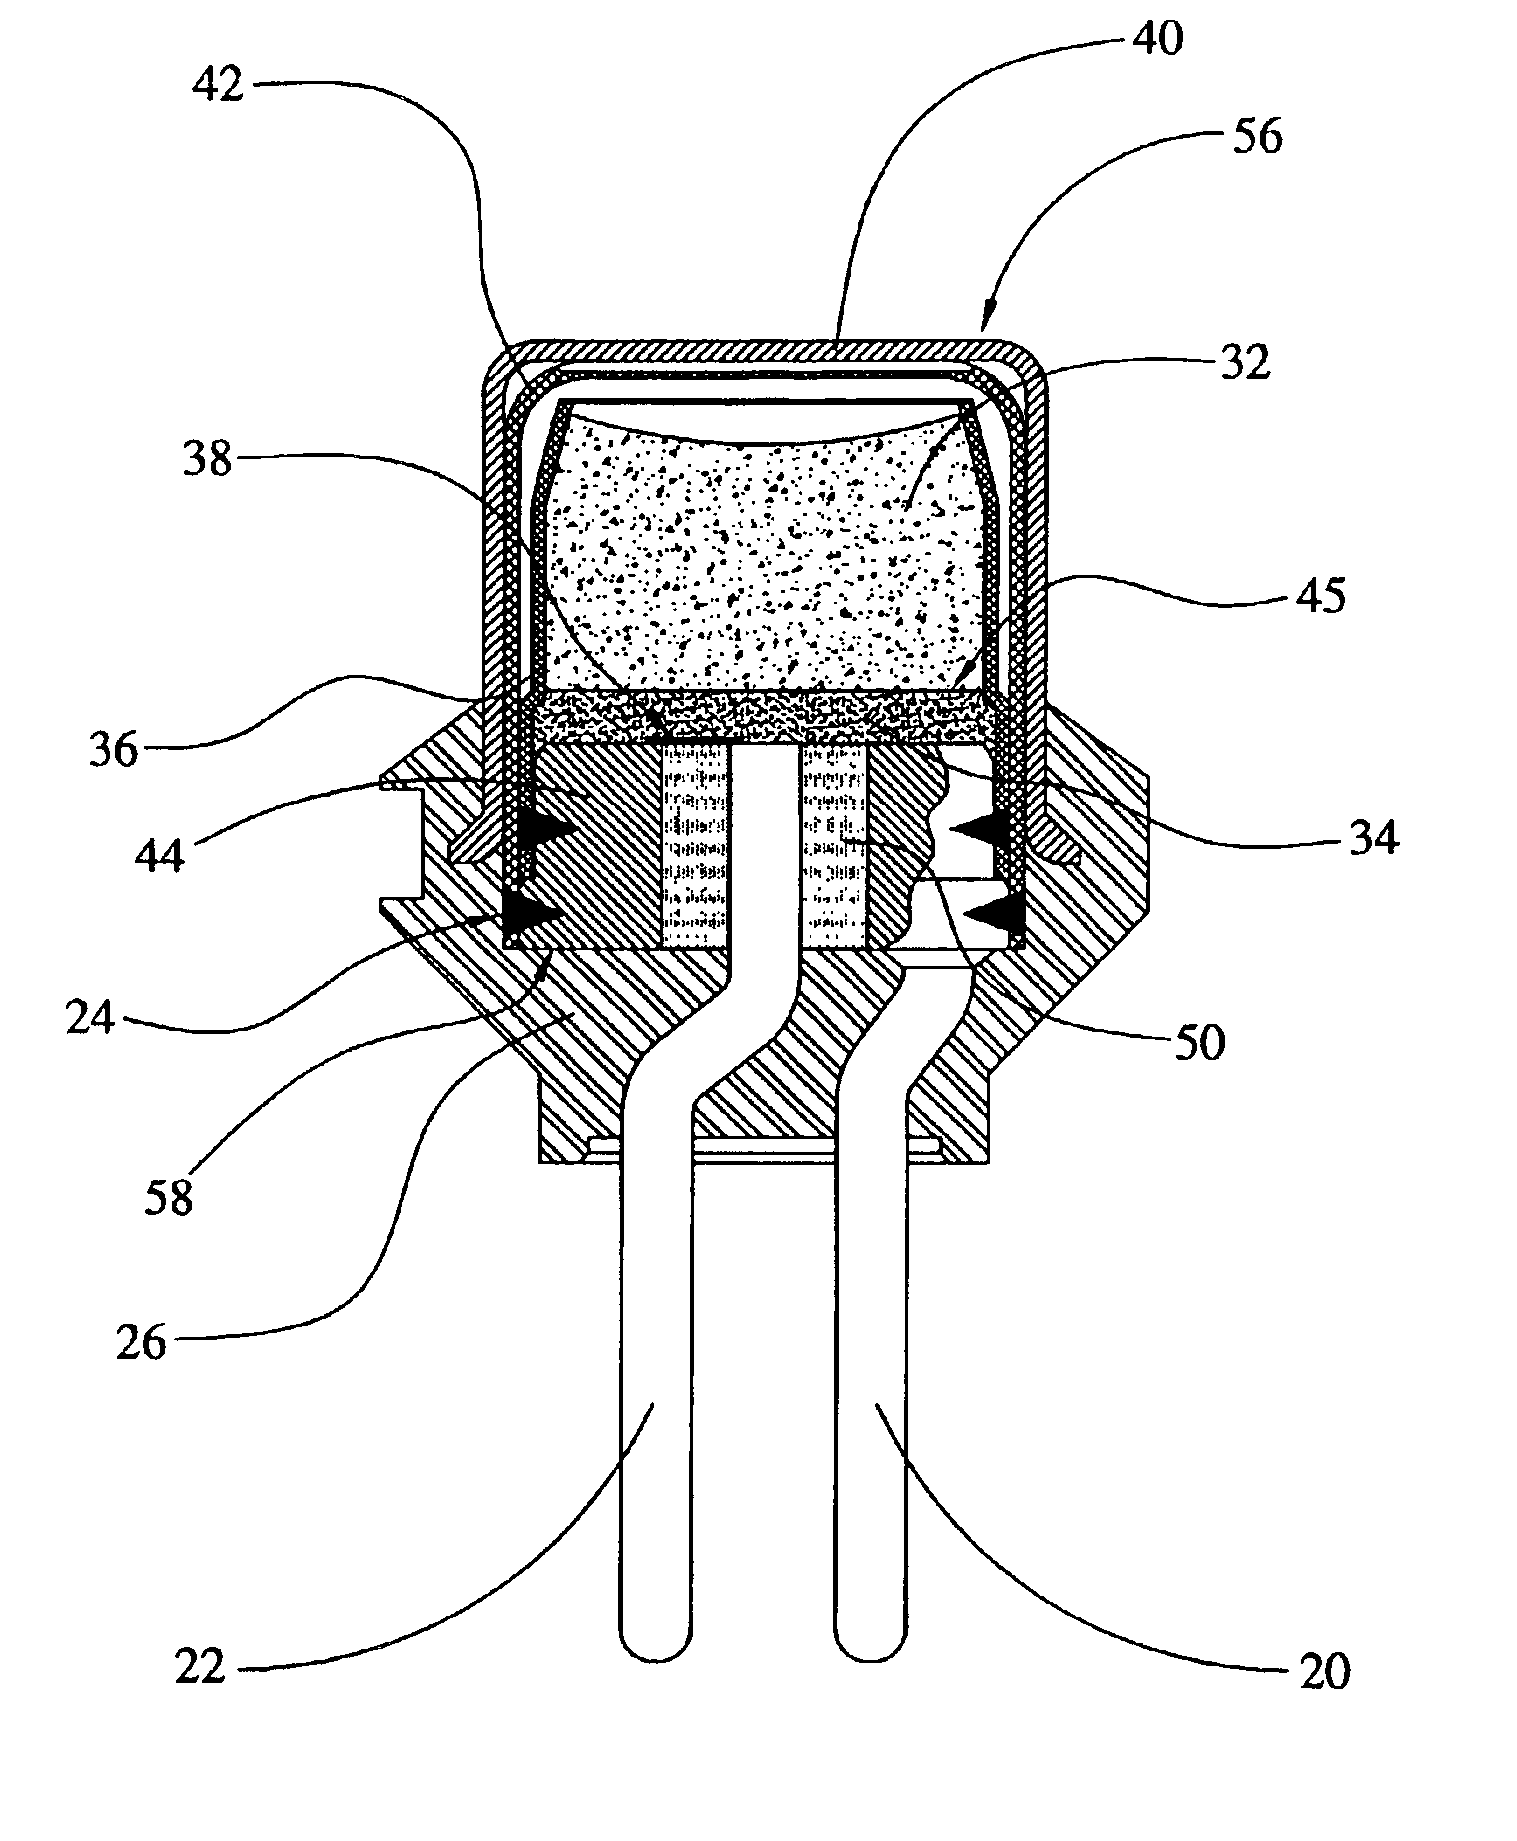 Initiator with a slip plane between an ignition charge and an output charge